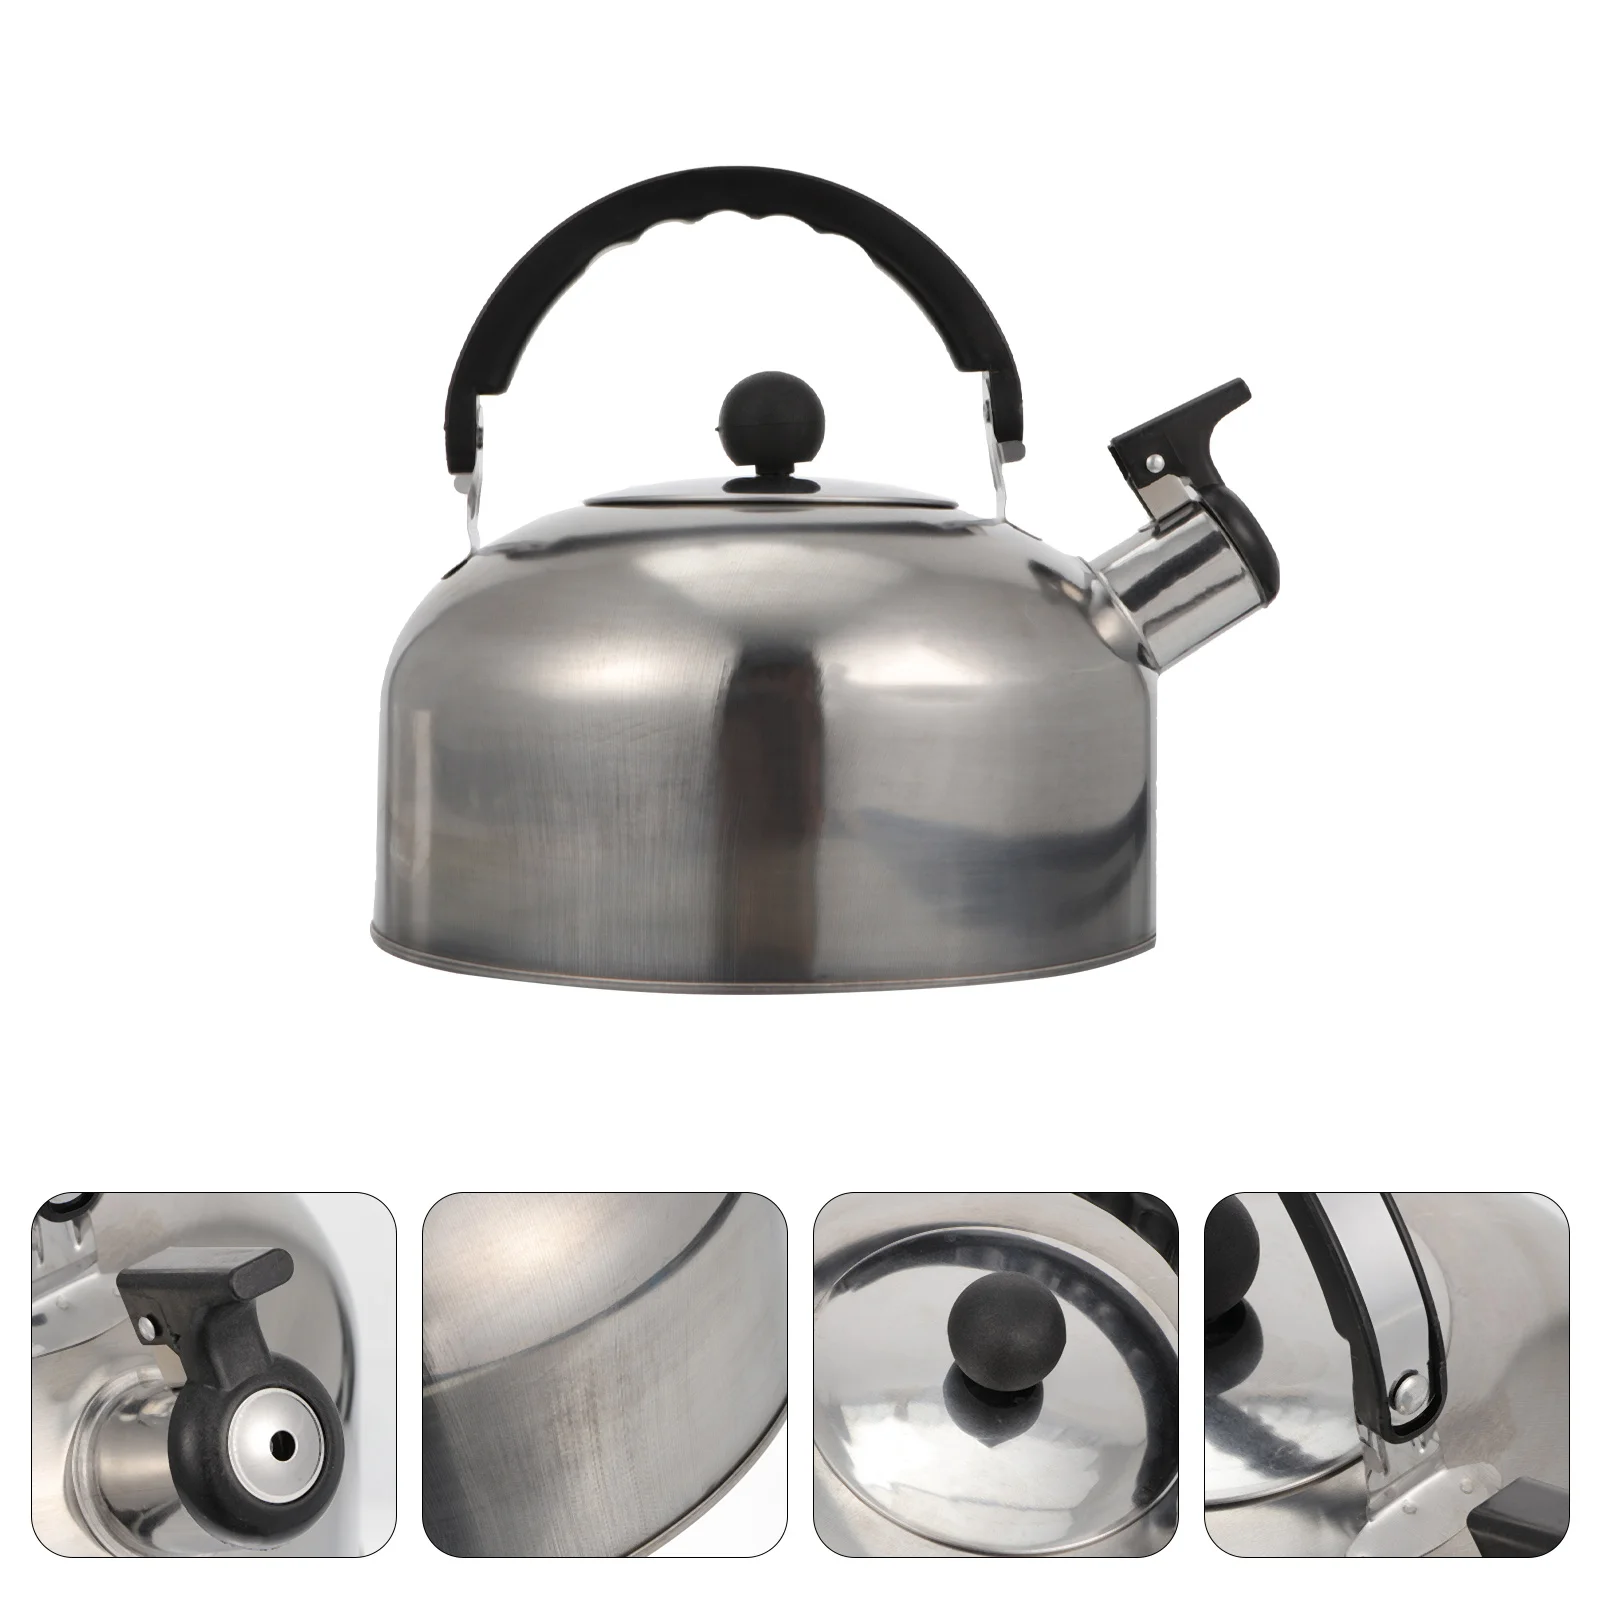 

Kettle Tea Whistling Stovetop Teapot Steel Stainless Water Stove Boiling Pot Coffee Teakettle Gas Kettles Pitcher Whistle Hot